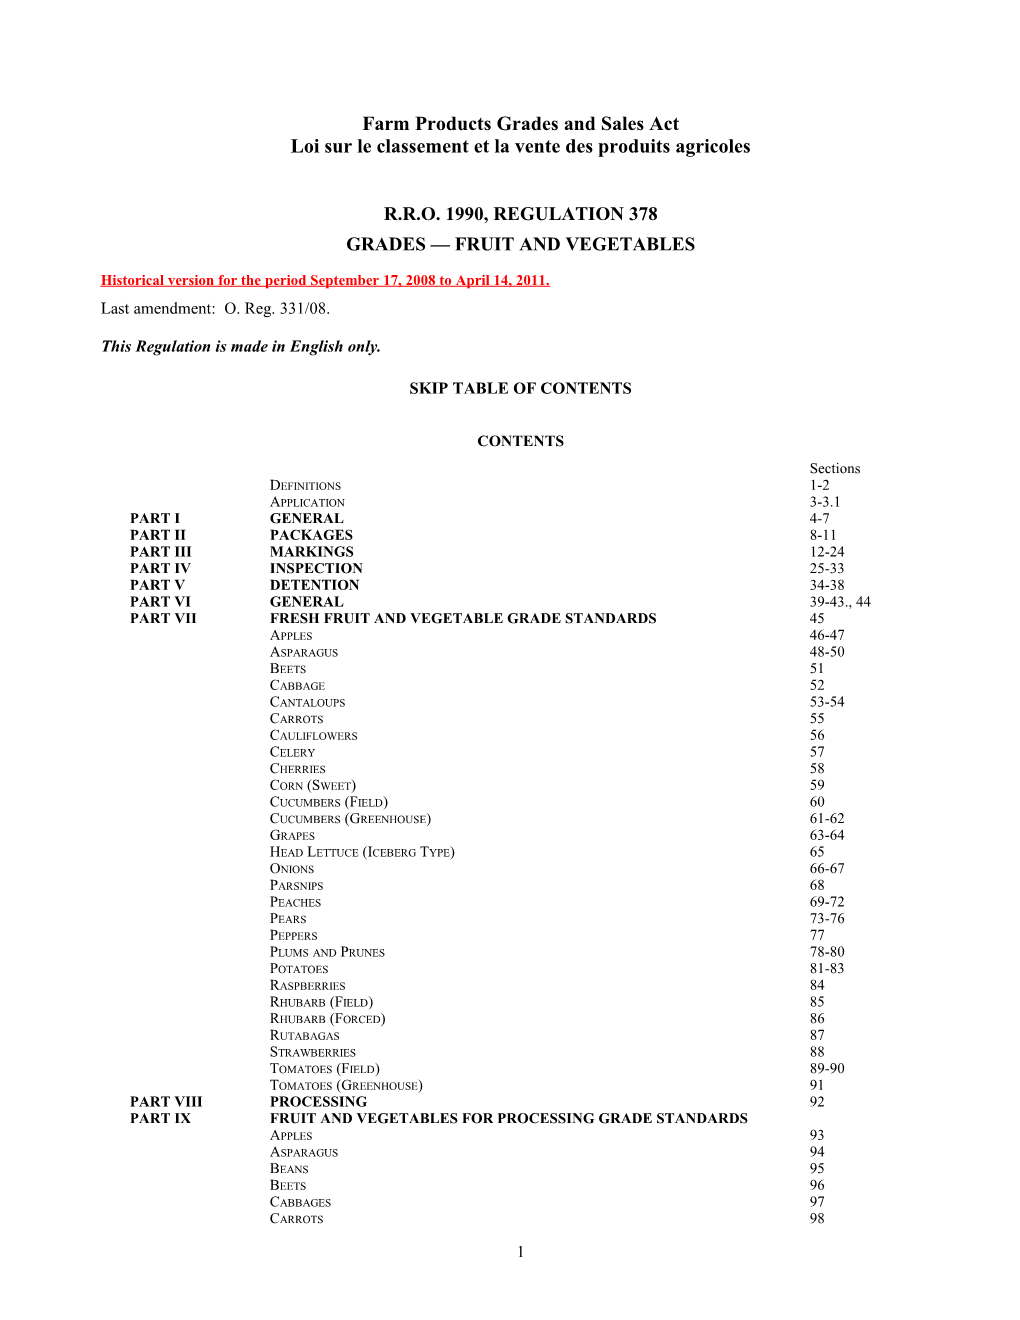 Farm Products Grades and Sales Act - R.R.O. 1990, Reg. 378